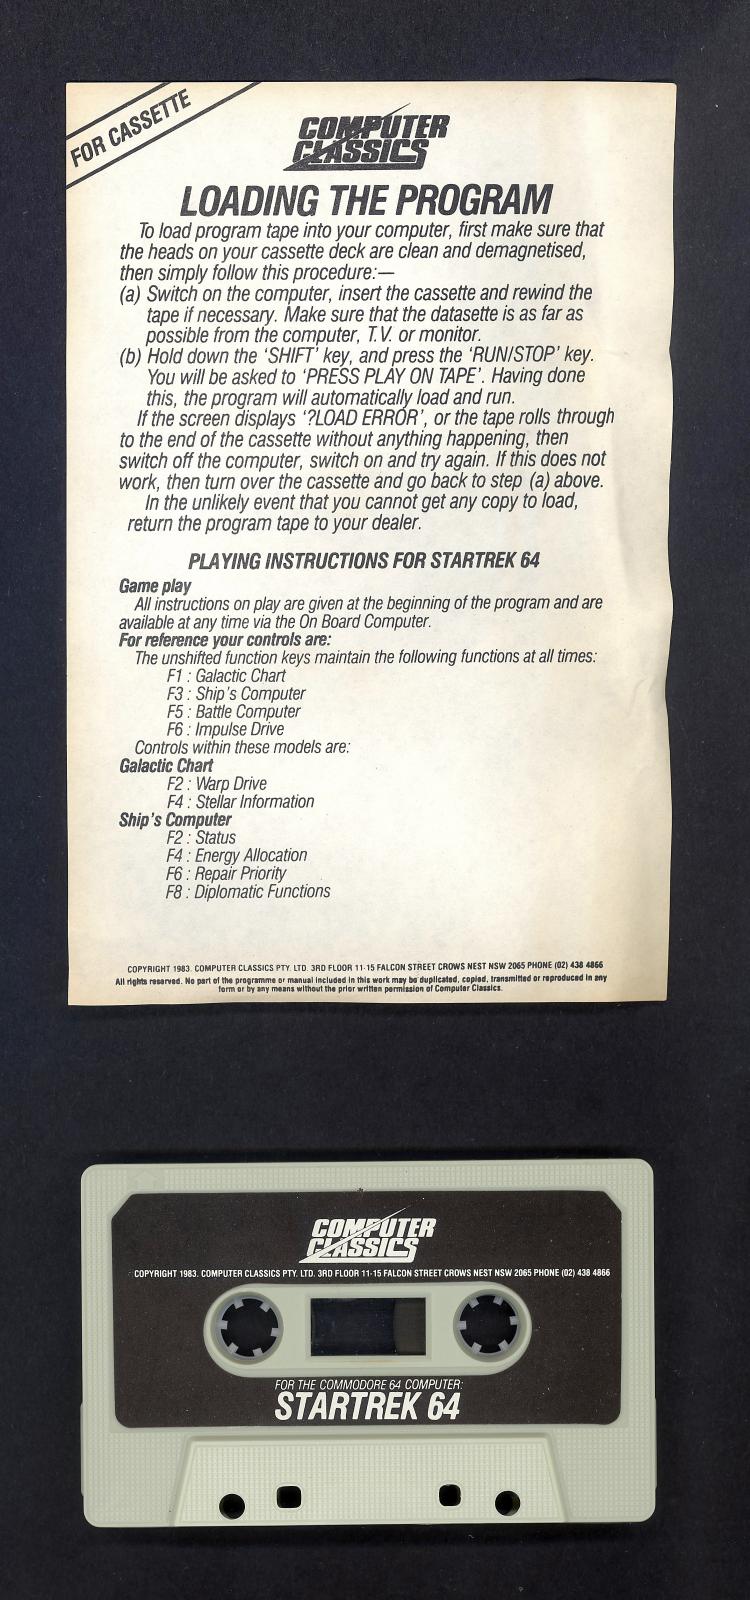 White paper instruction sheet, with black text, with description on how to load a play the StarTrek game.